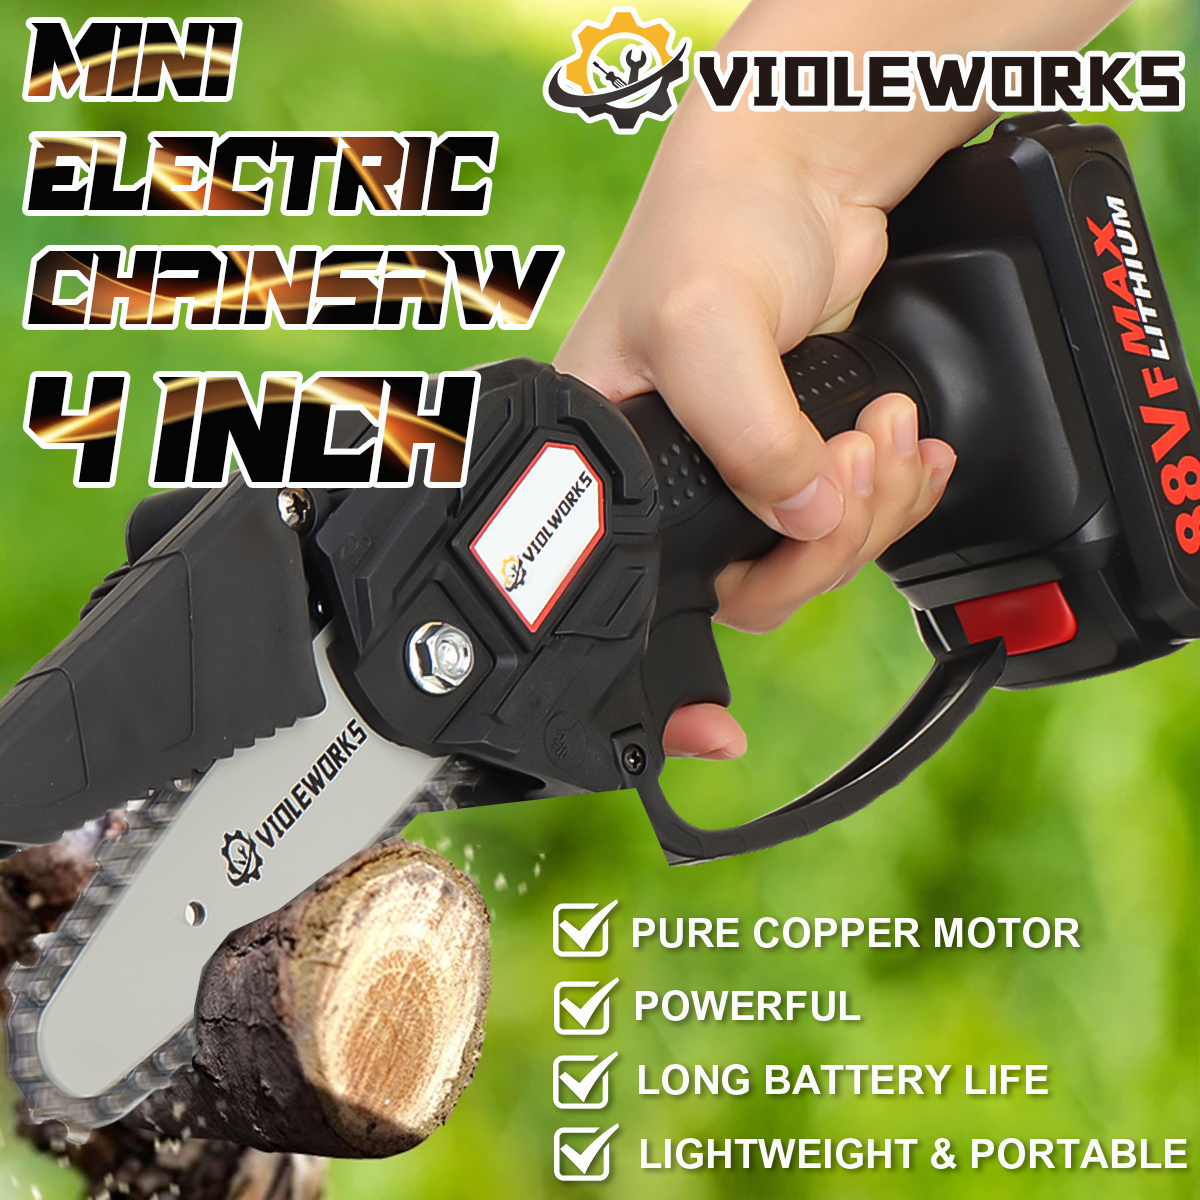 VIOLEWORKS-4-Inch-88VF-Cordless-Electric-Chain-Saw-1500W-One-Hand-Saw-LED-Woodworking-Wood-Cutter-W--1868924-2